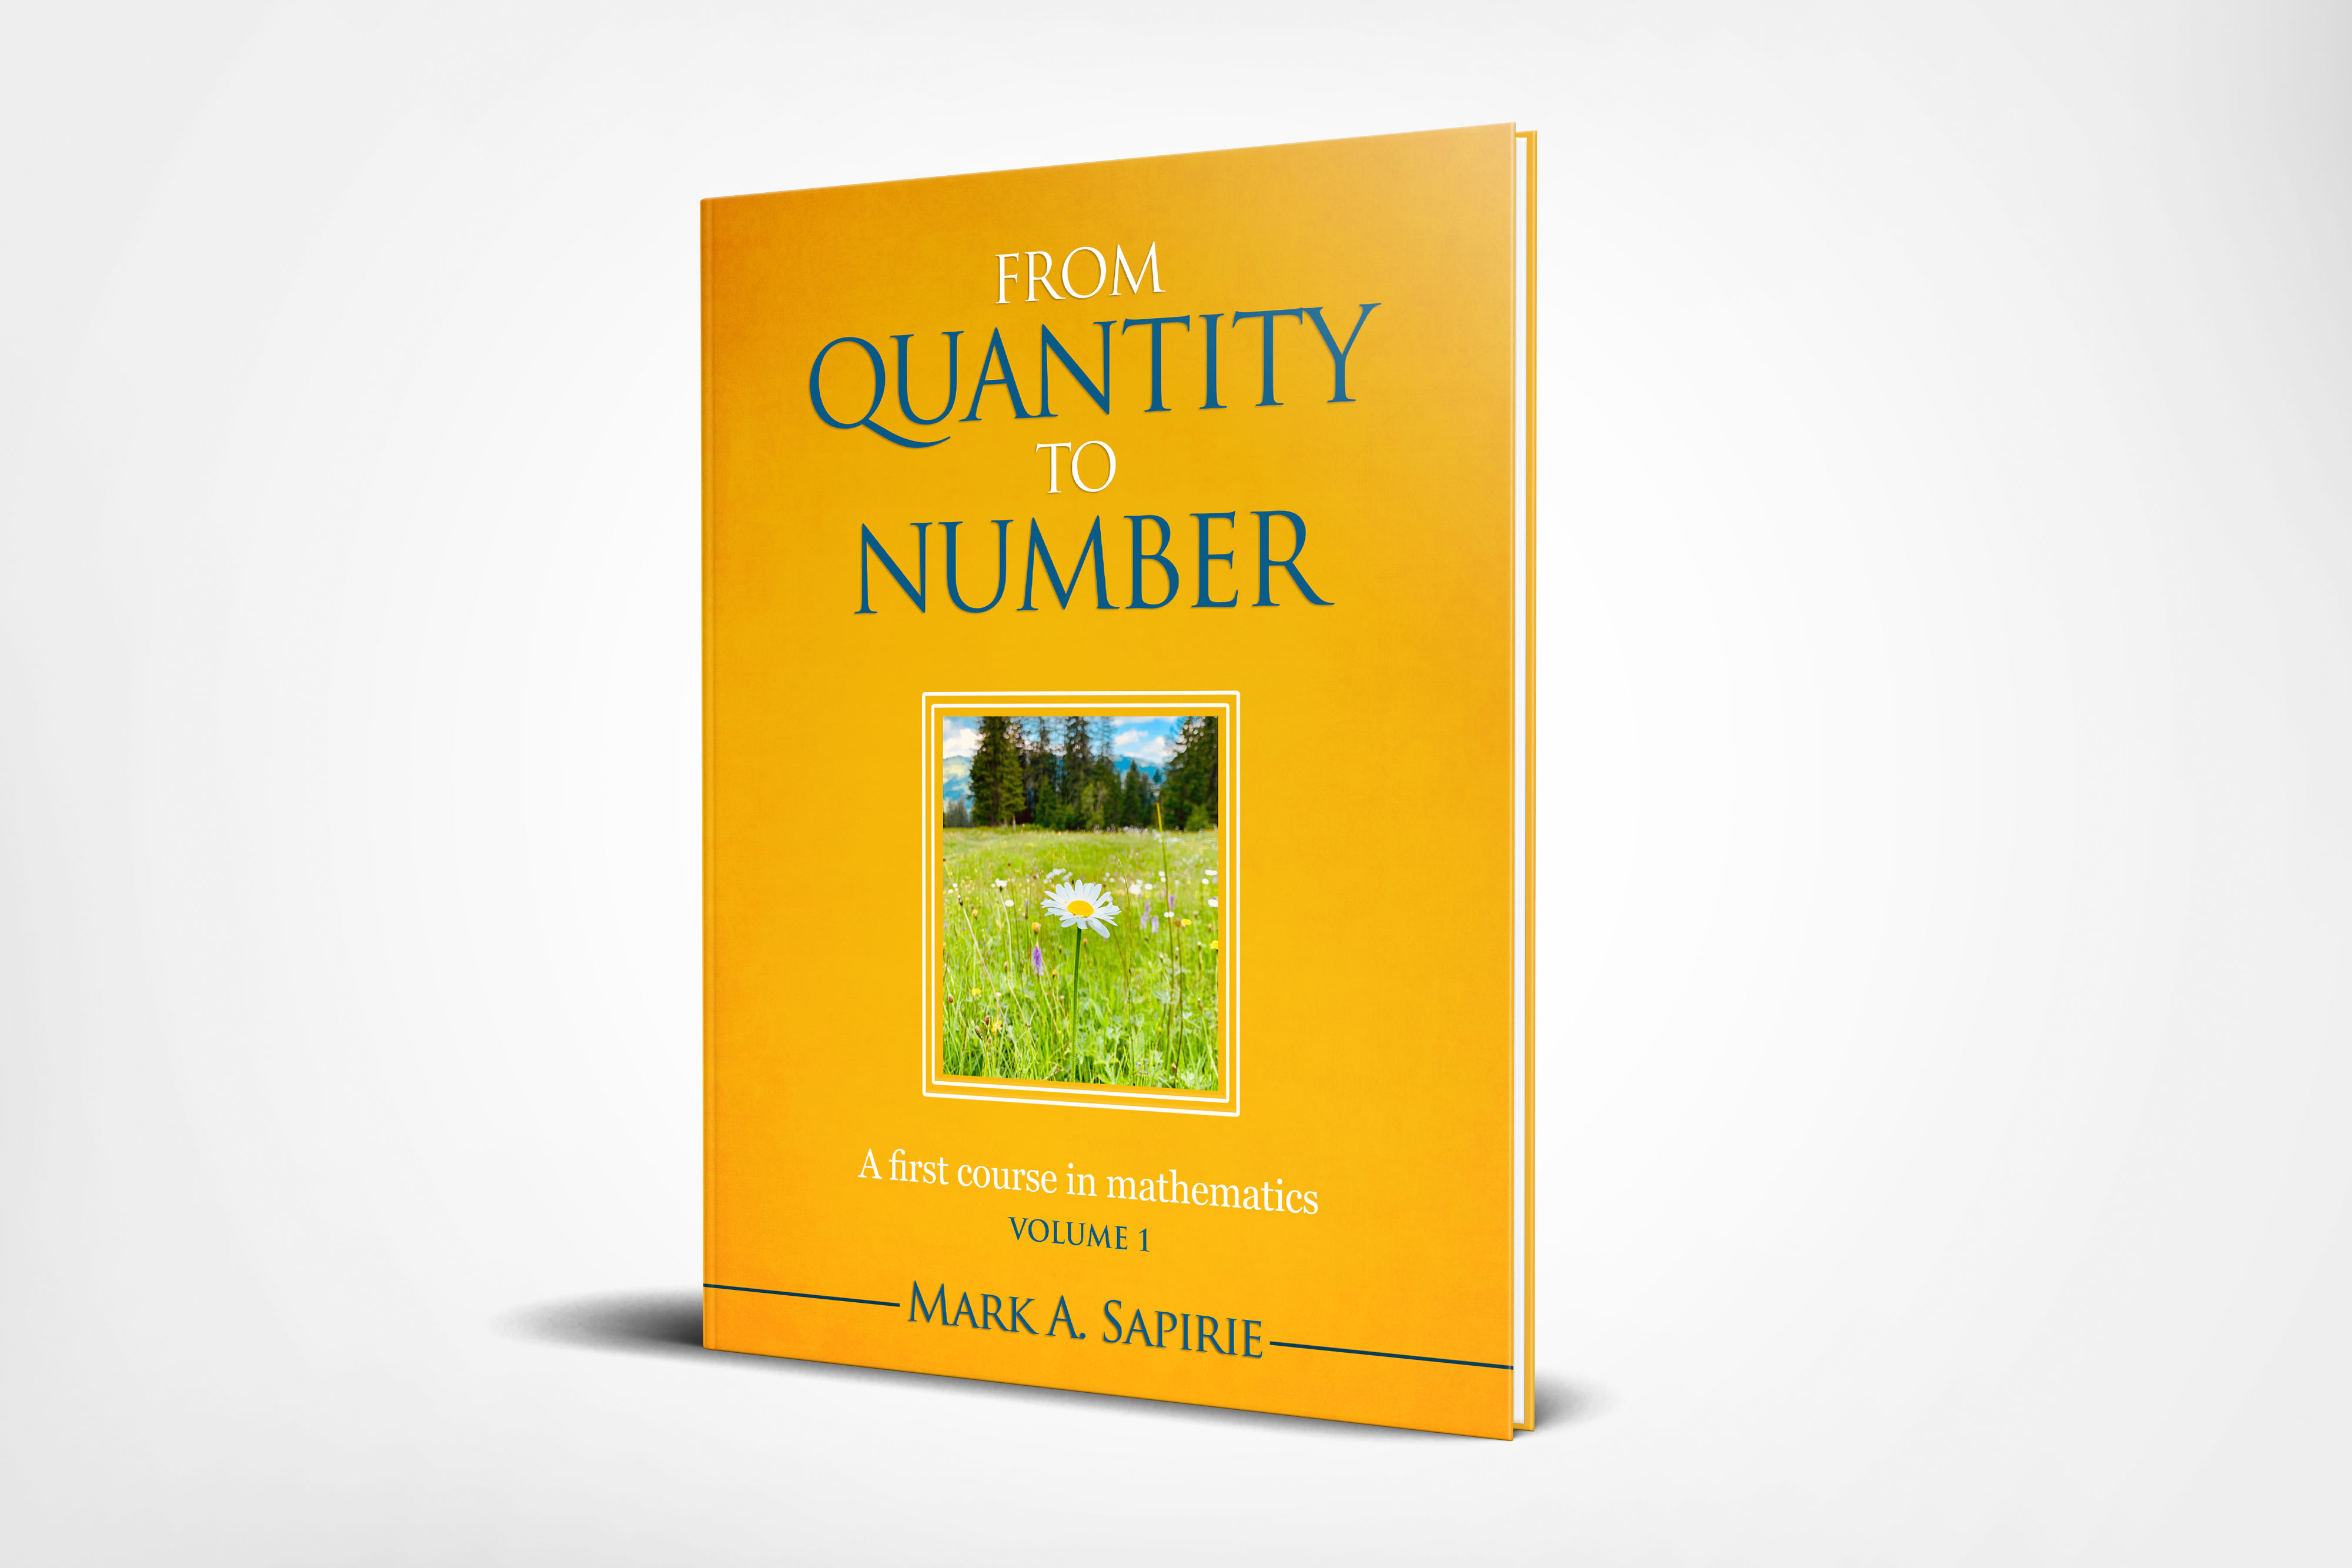 From Quantity to Number vol. 1